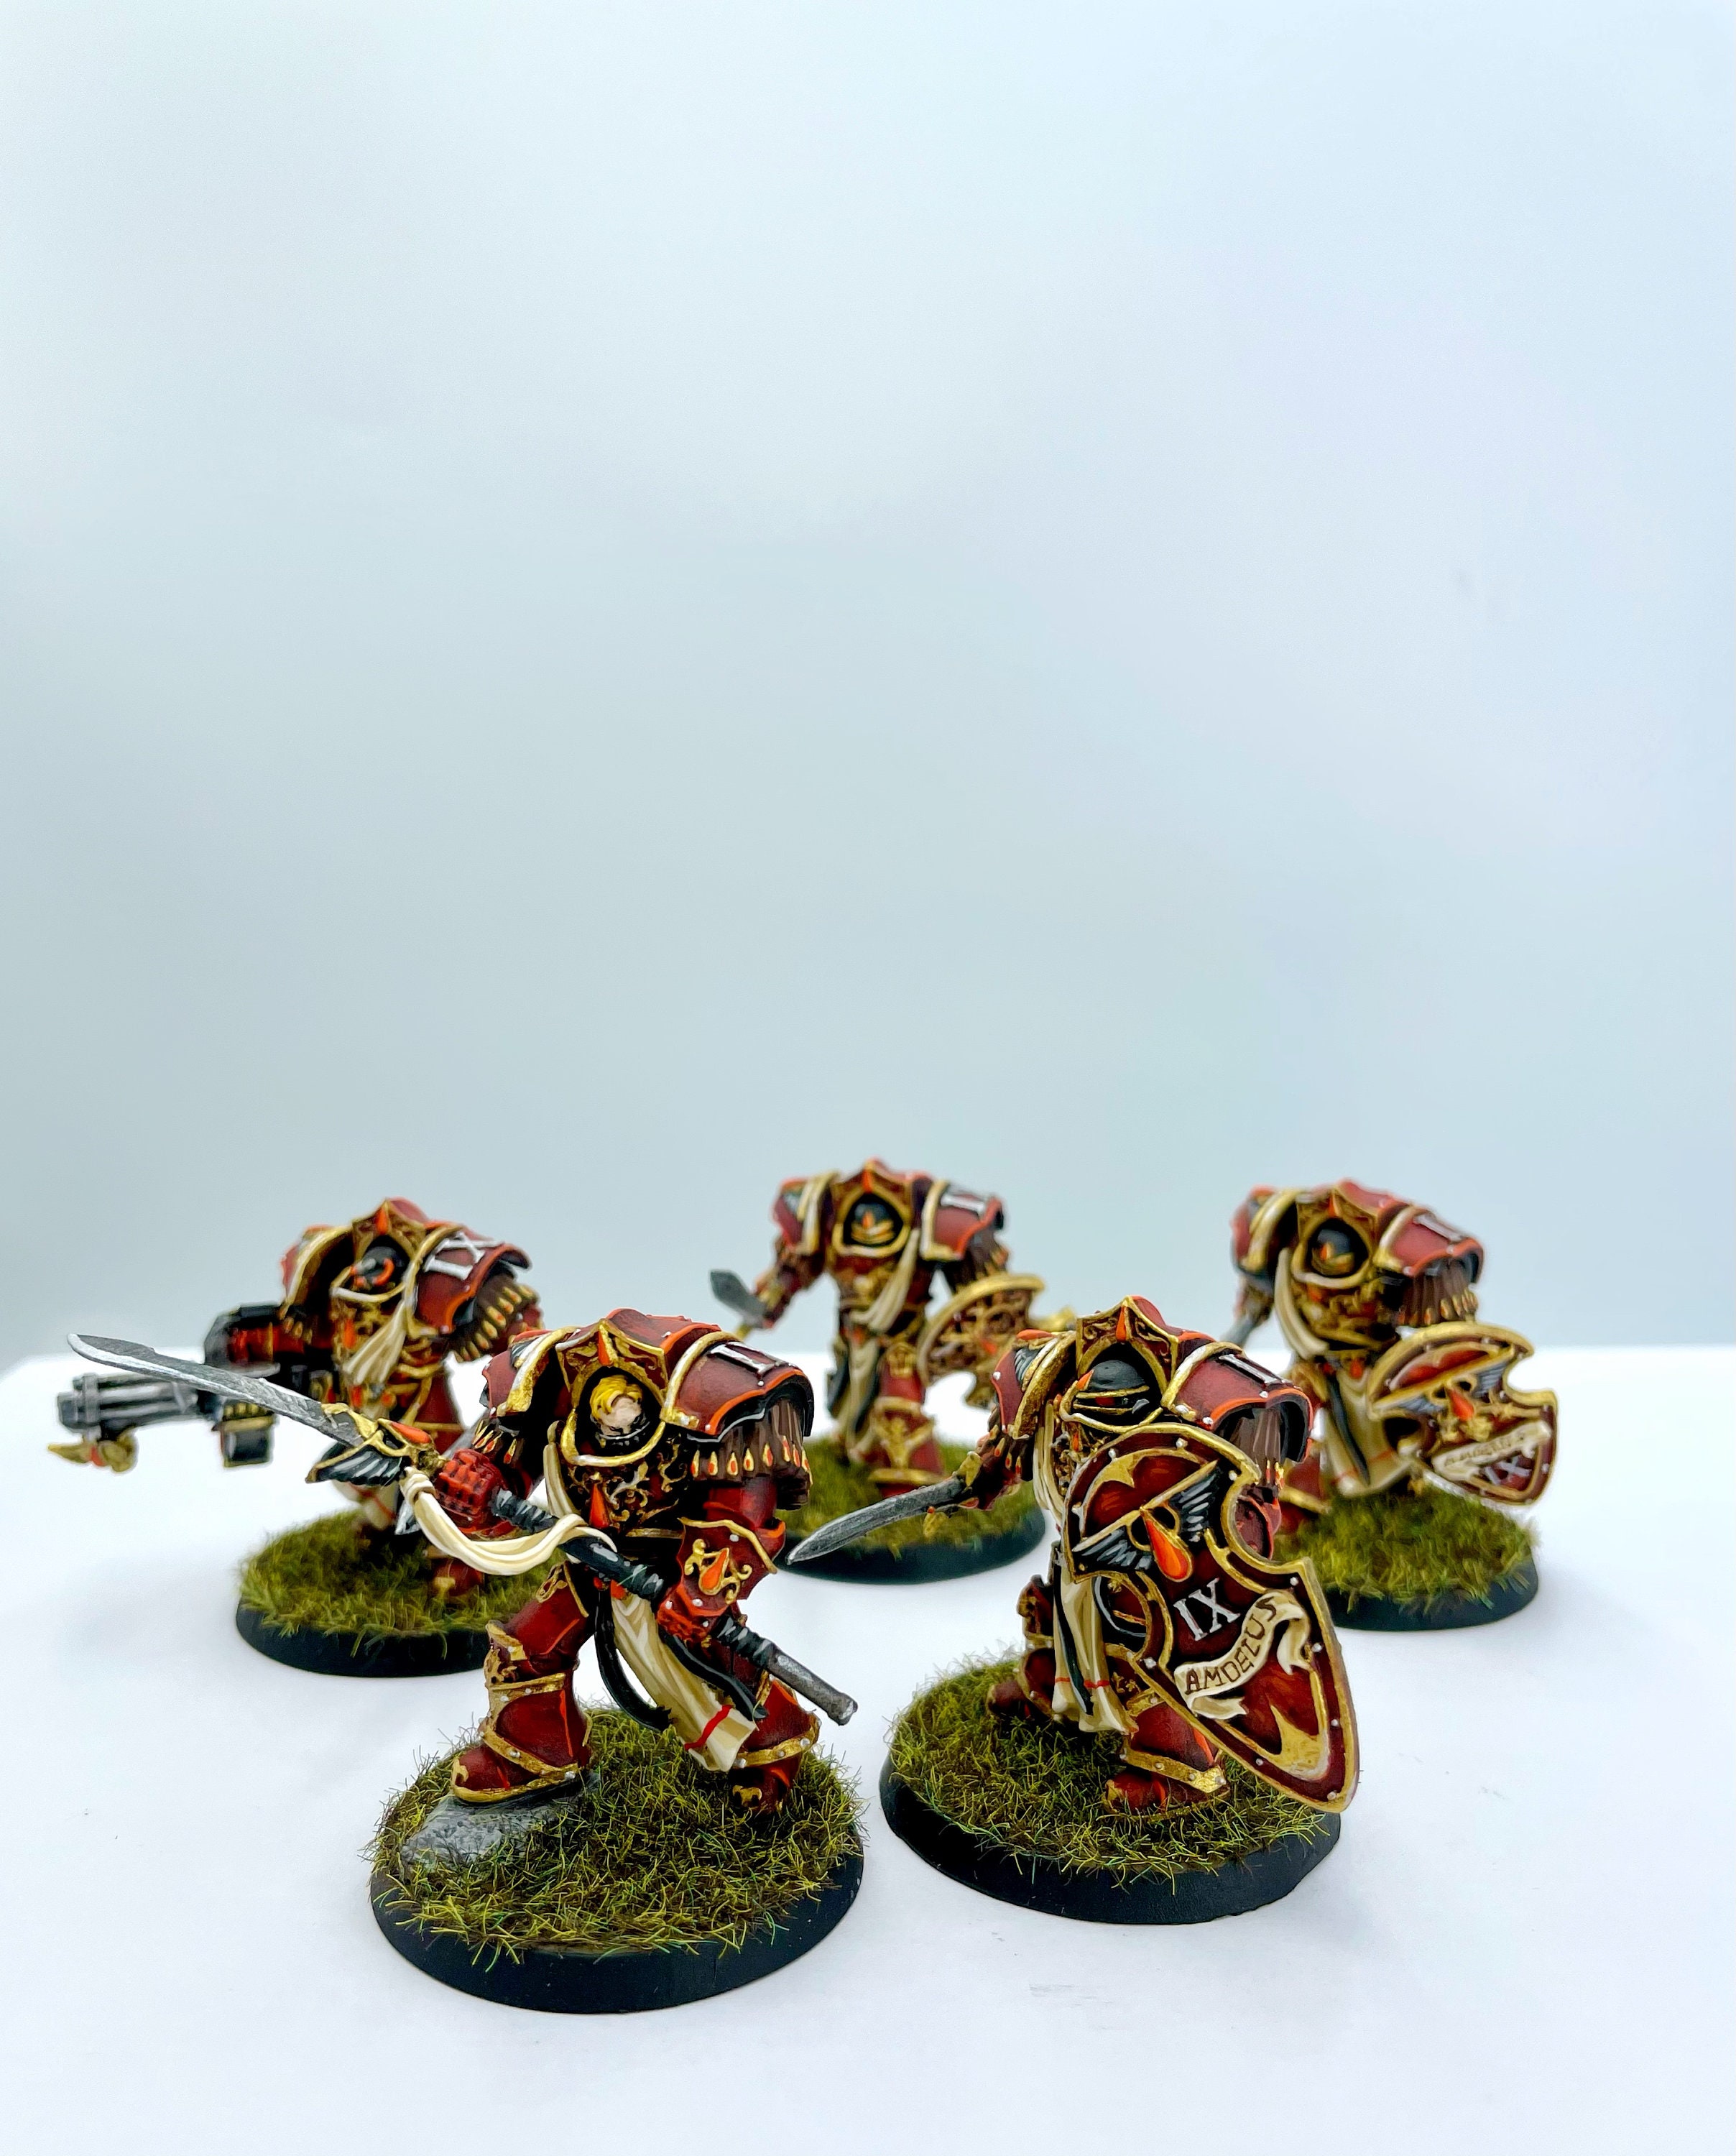 Warhammer 40k Leviathan space marine army Pro painted blood ravens